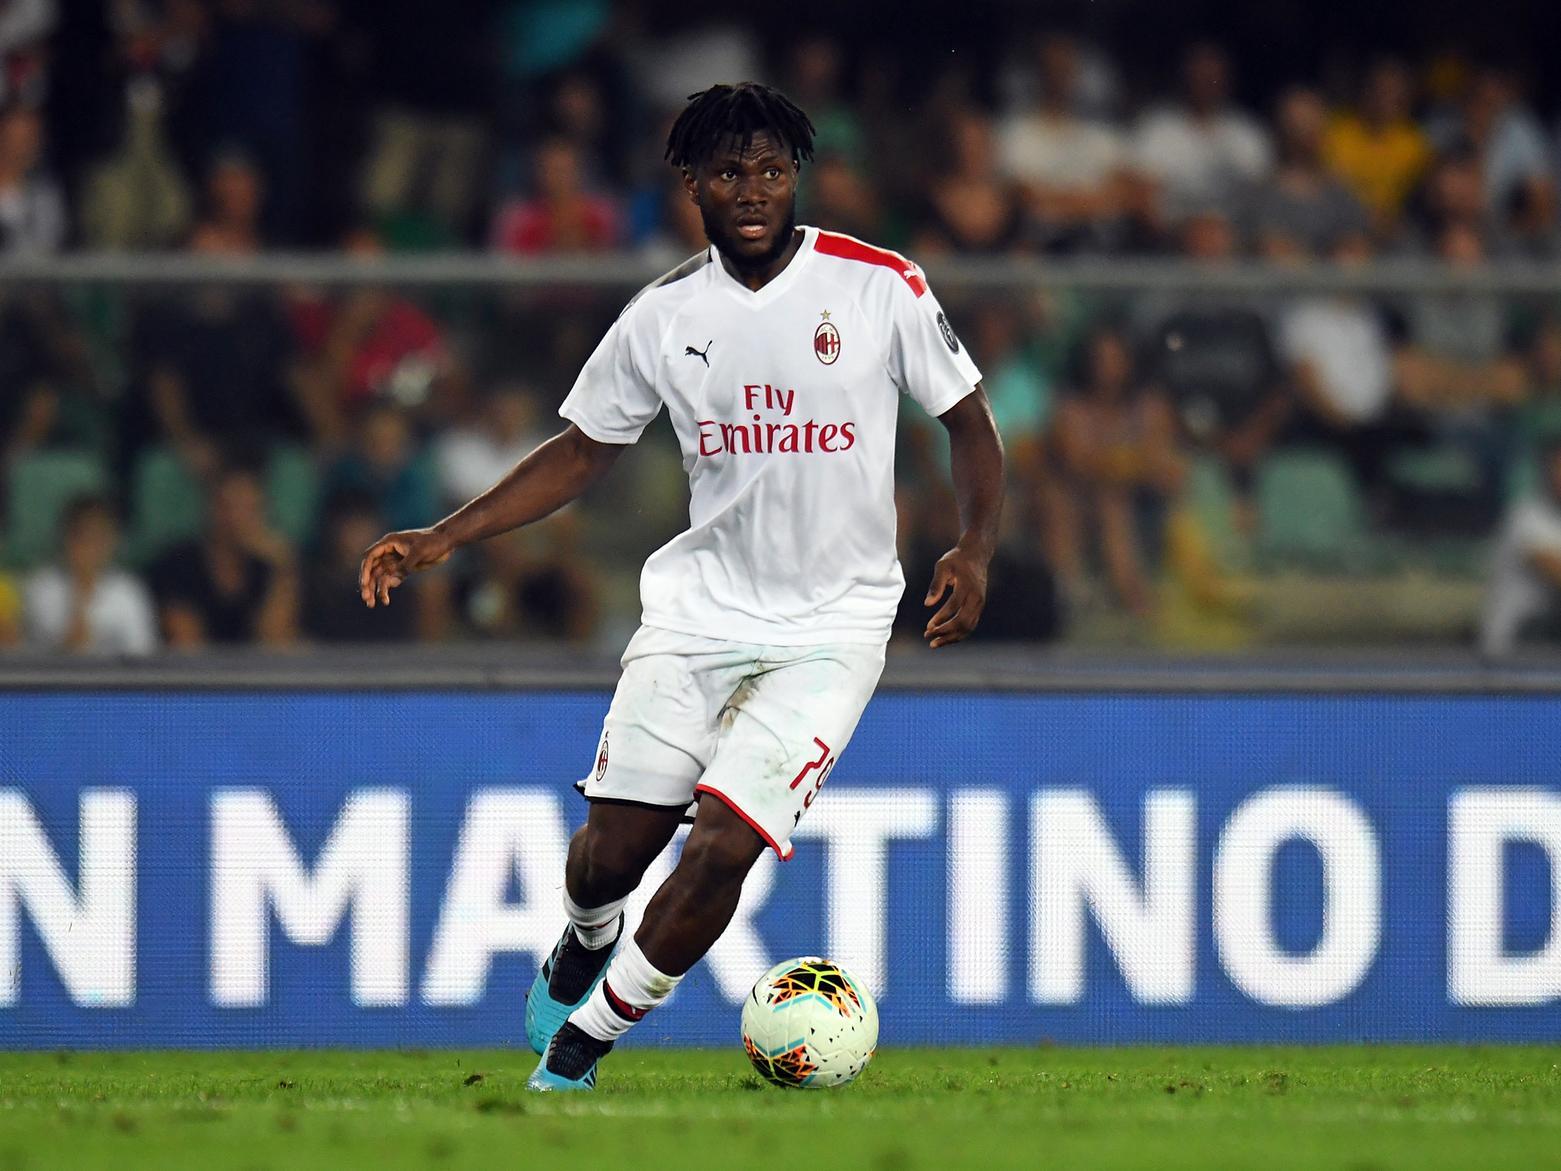 A slightly less successful acquisition, Kessie is yet to adapt to the Premier League since arriving from A.C. Milan in 2022.